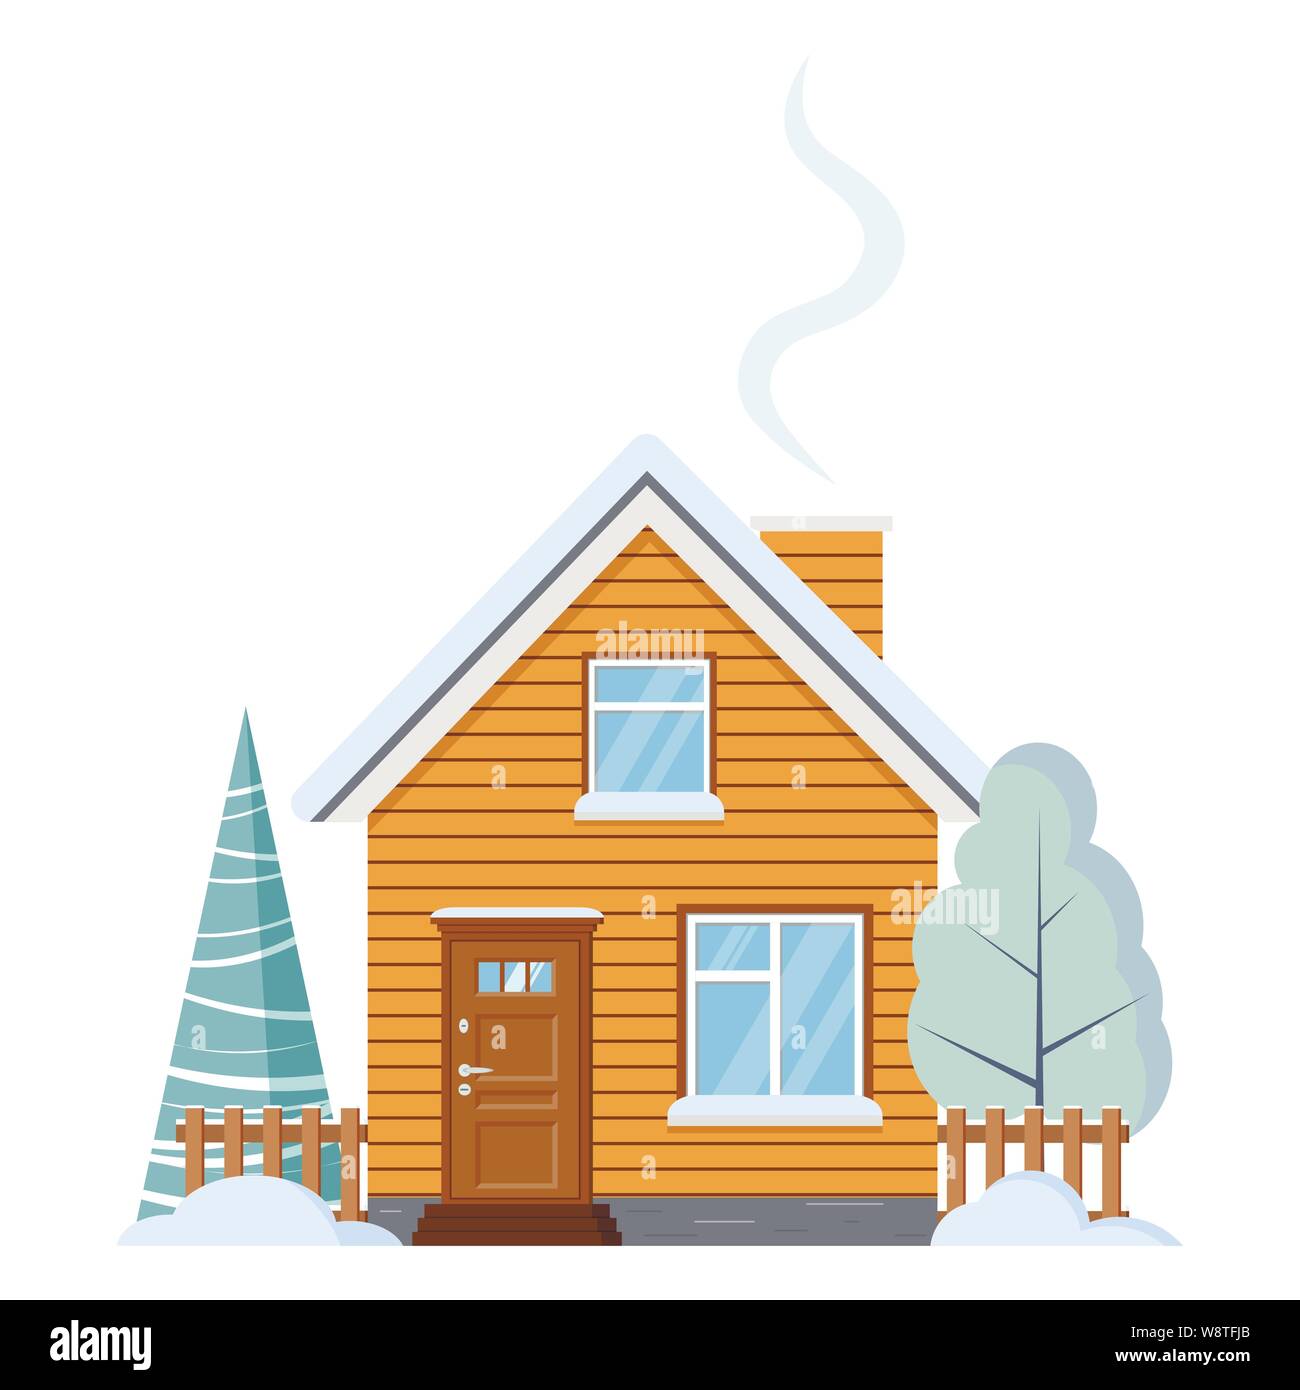 Flat design isolated wooden rural farm house with attic, chimney, fences, with snowy winter tree and spruce. Stock Vector